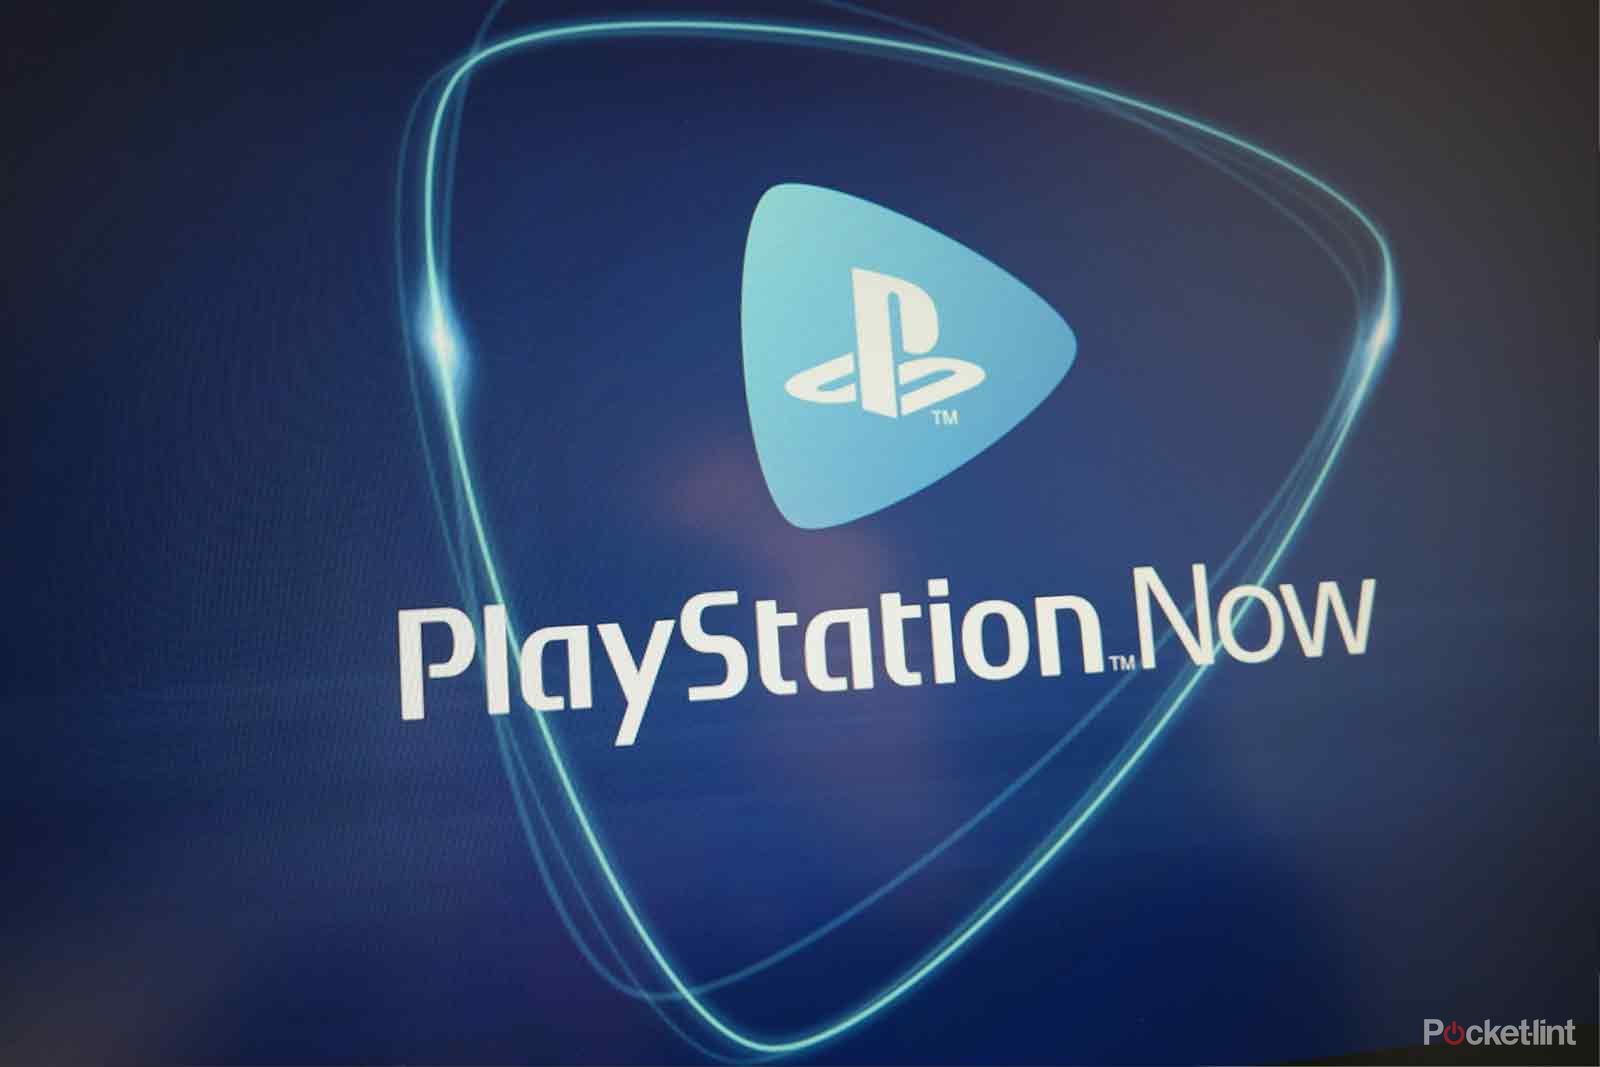 PlayStation Now 1080p streaming is great for PC gamers